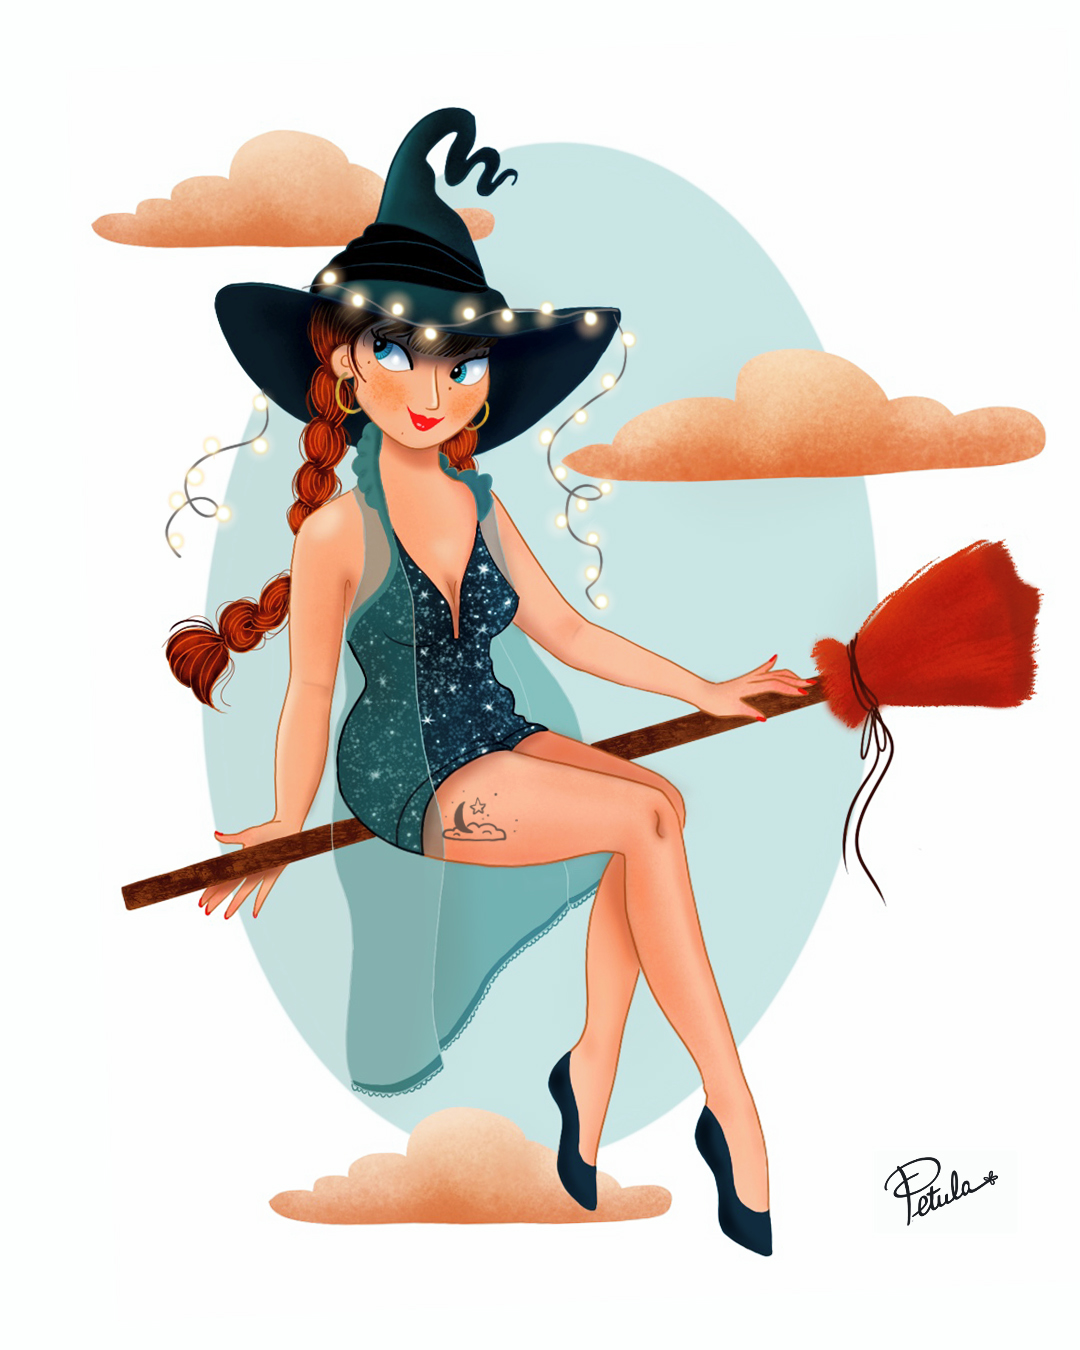 PETULA ROCHER ILLUSTRATRICE GENEVE SORCIERE WITCH HALLOWEEN SEXYWITCH DESSIN ILLUSTRATION